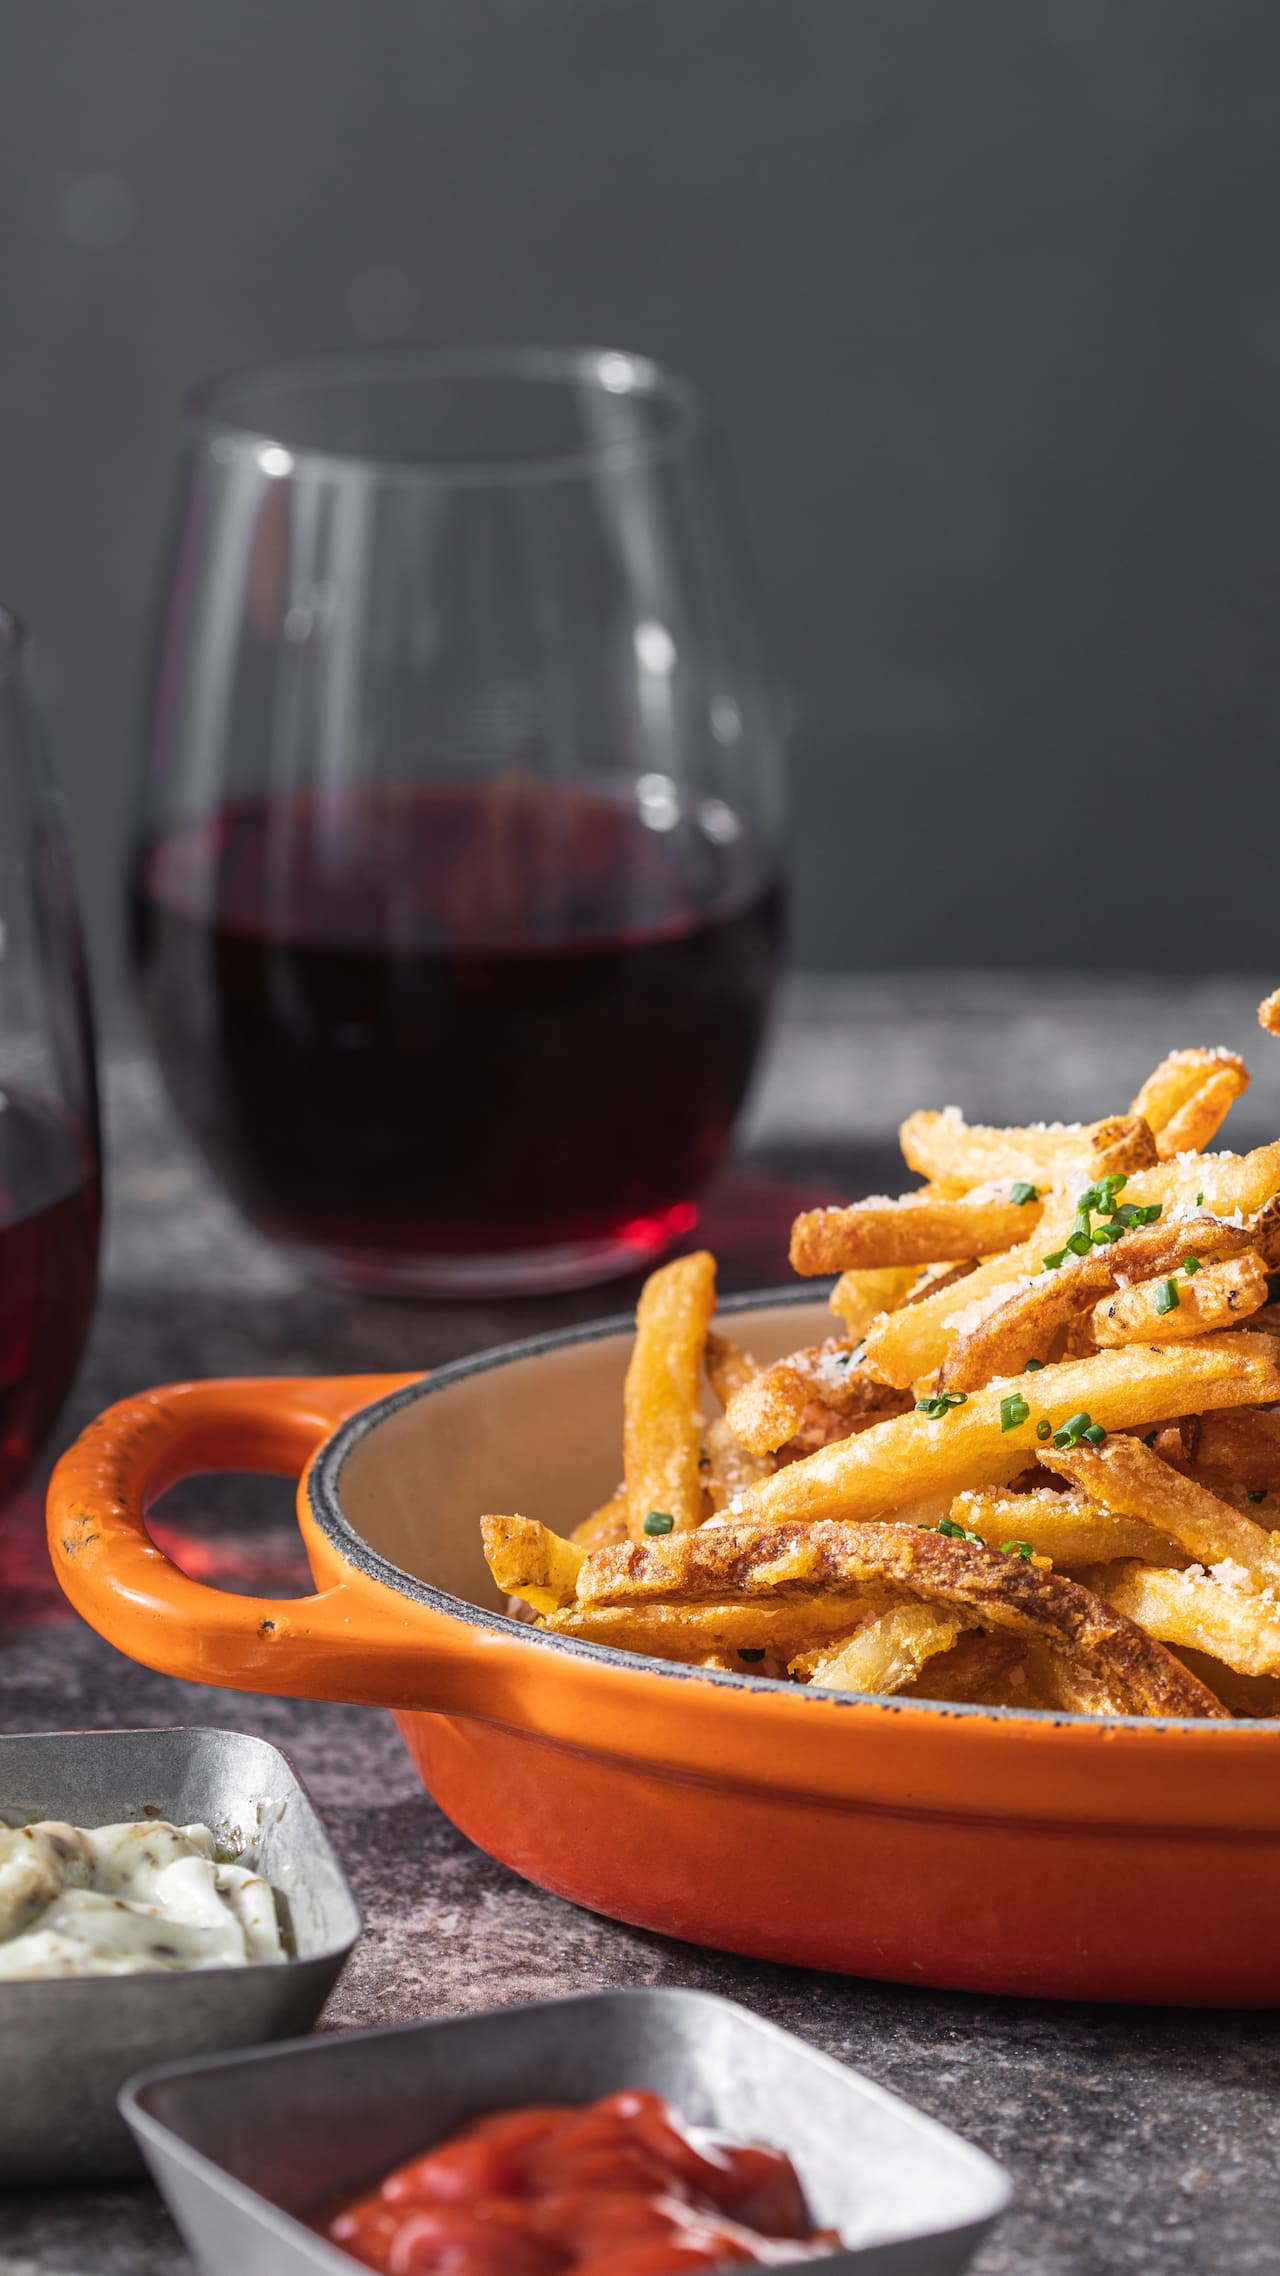 Fries and Two Red Wine